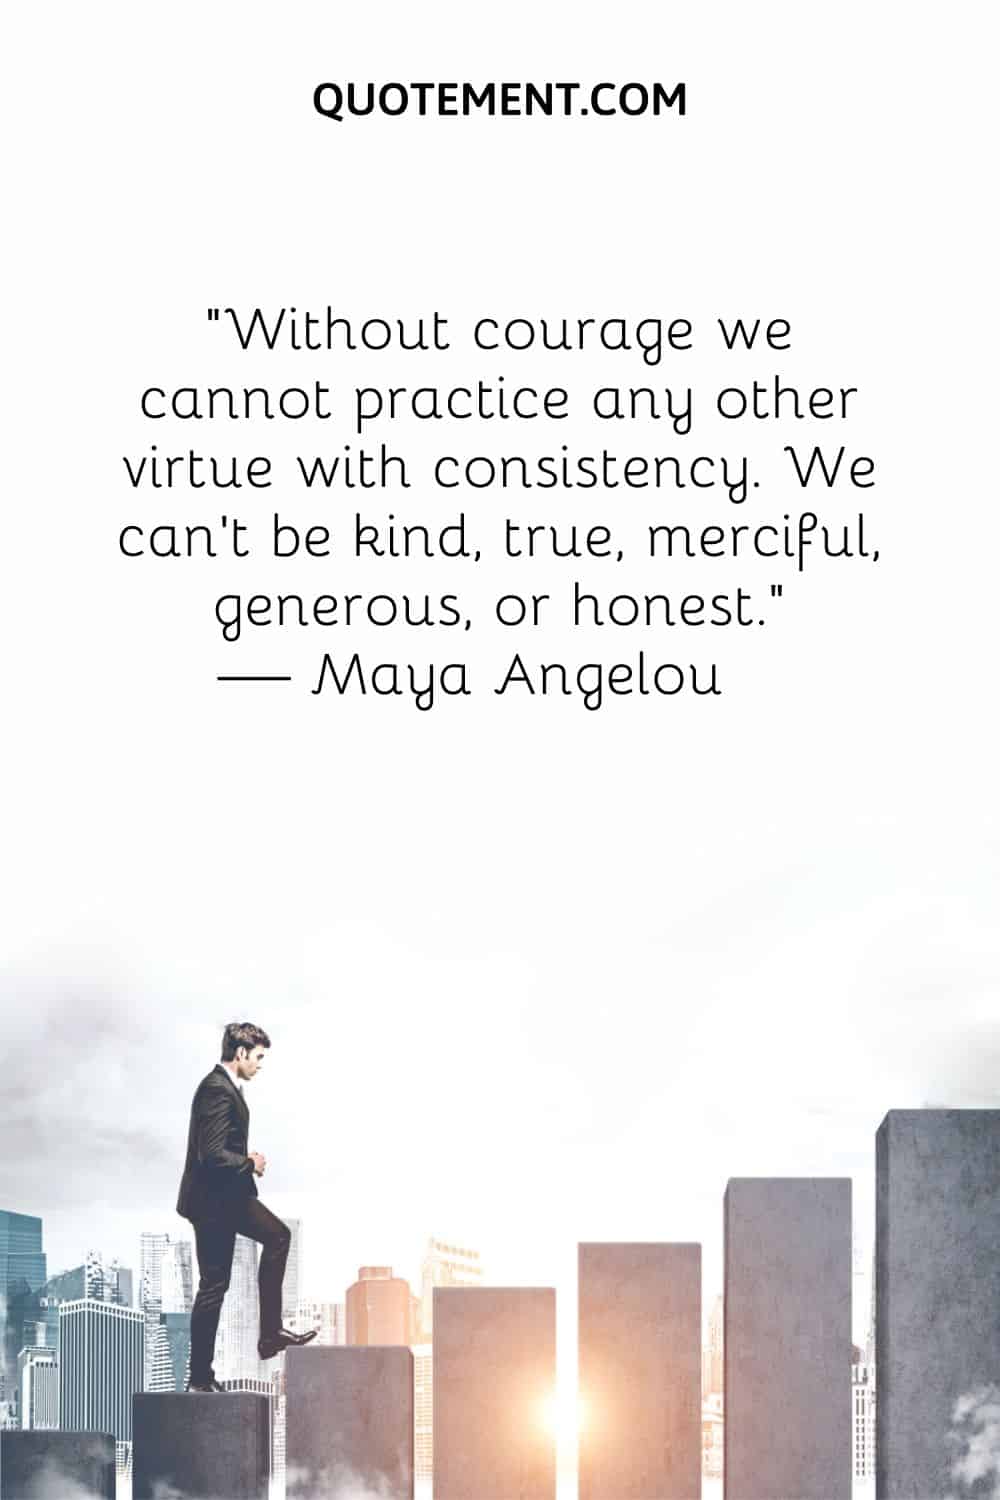 Without courage we cannot practice any other virtue with consistency